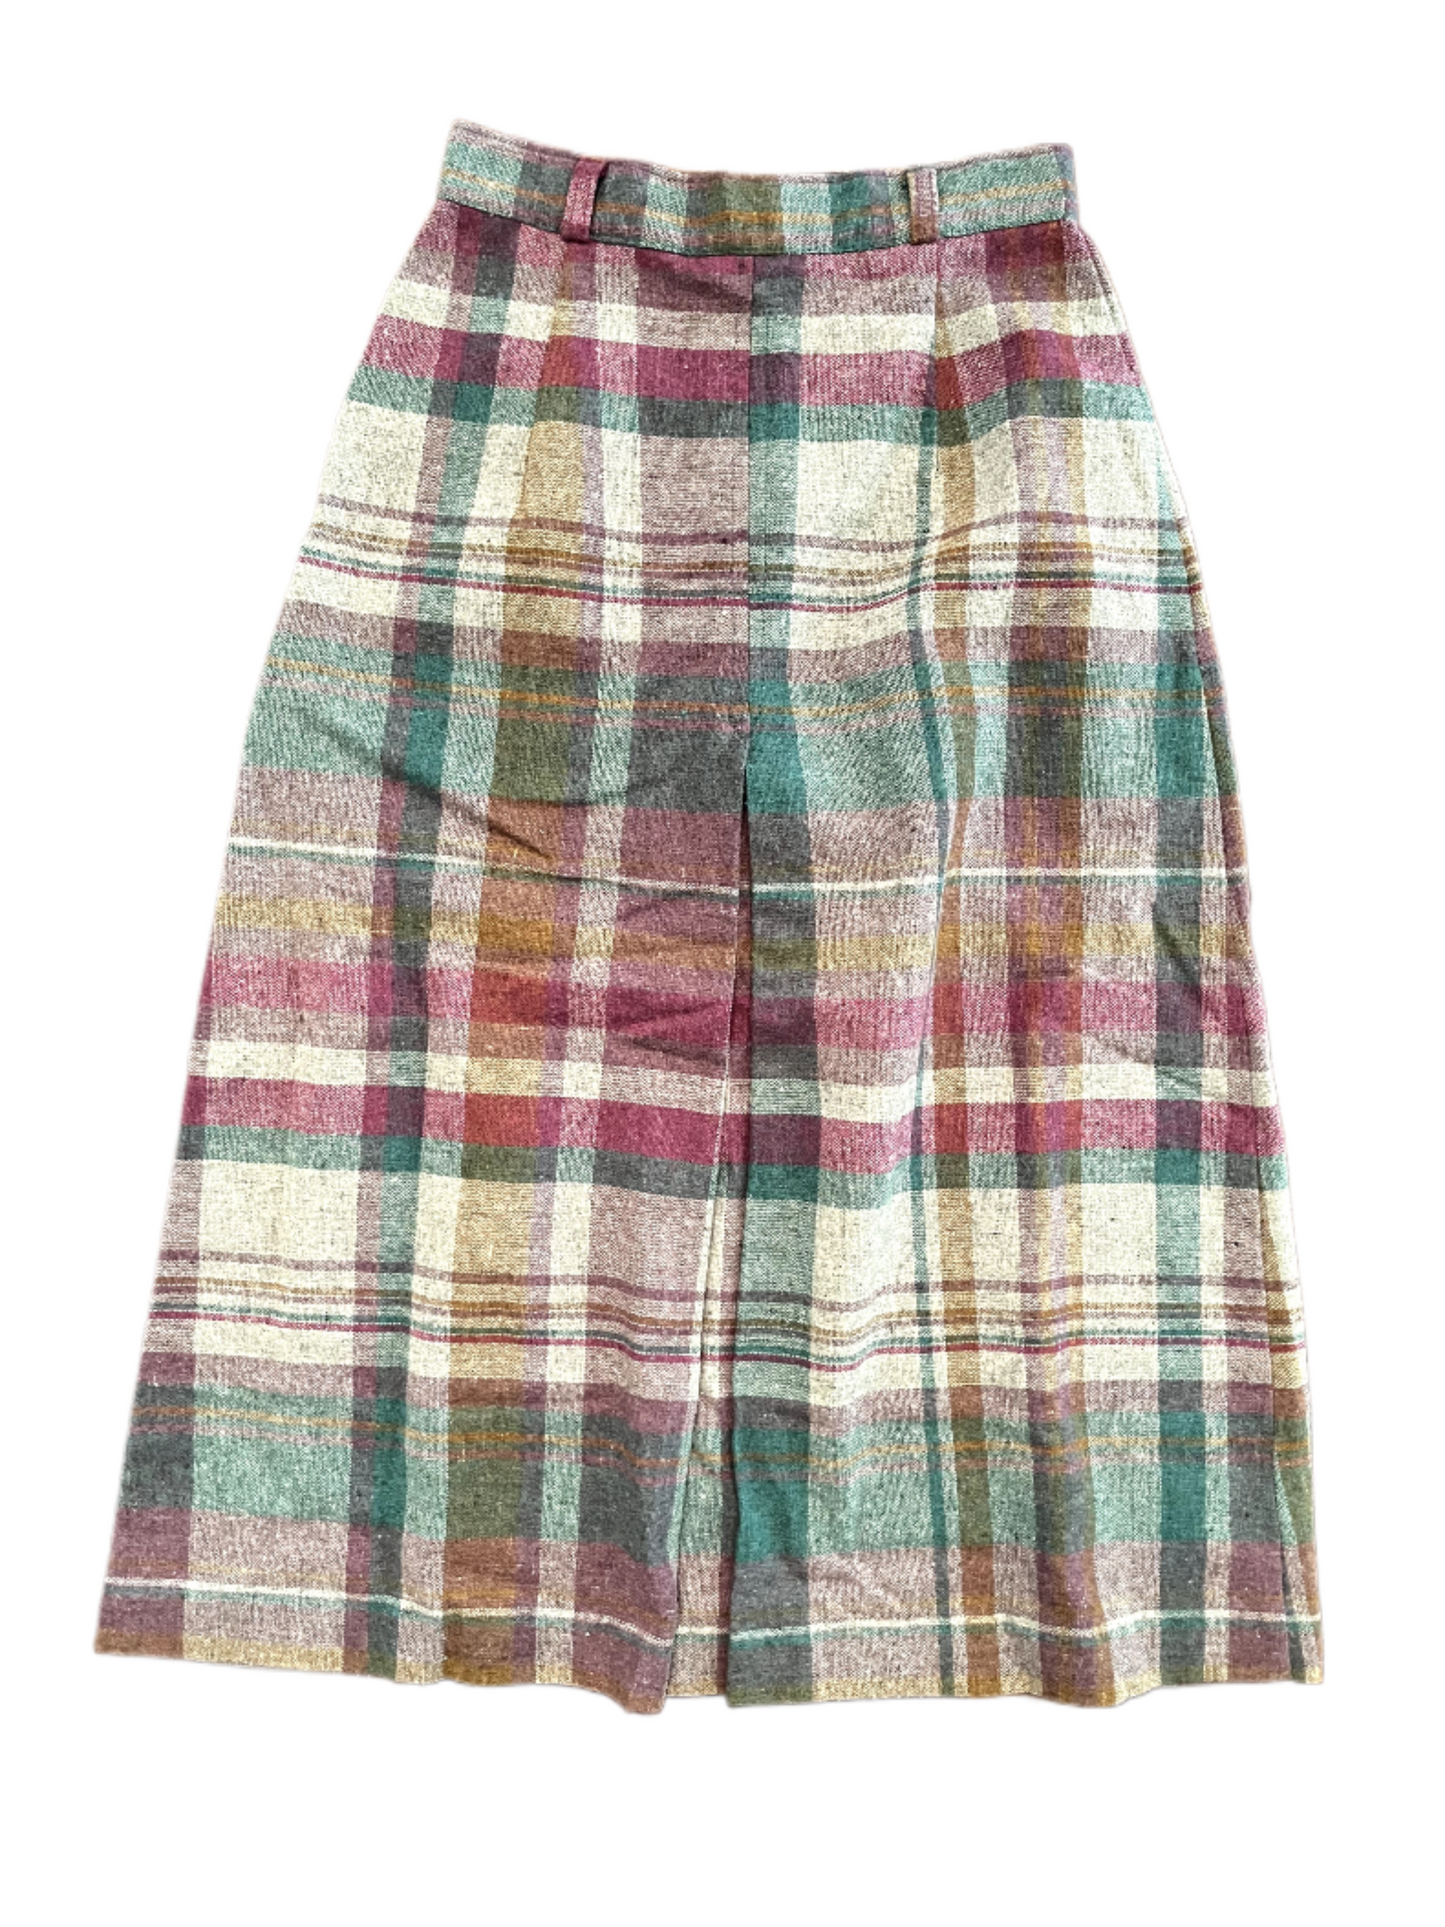 Vintage ladies purple, teal, yellow and white plaid 7/8th skirt on white background back view showing pleat.